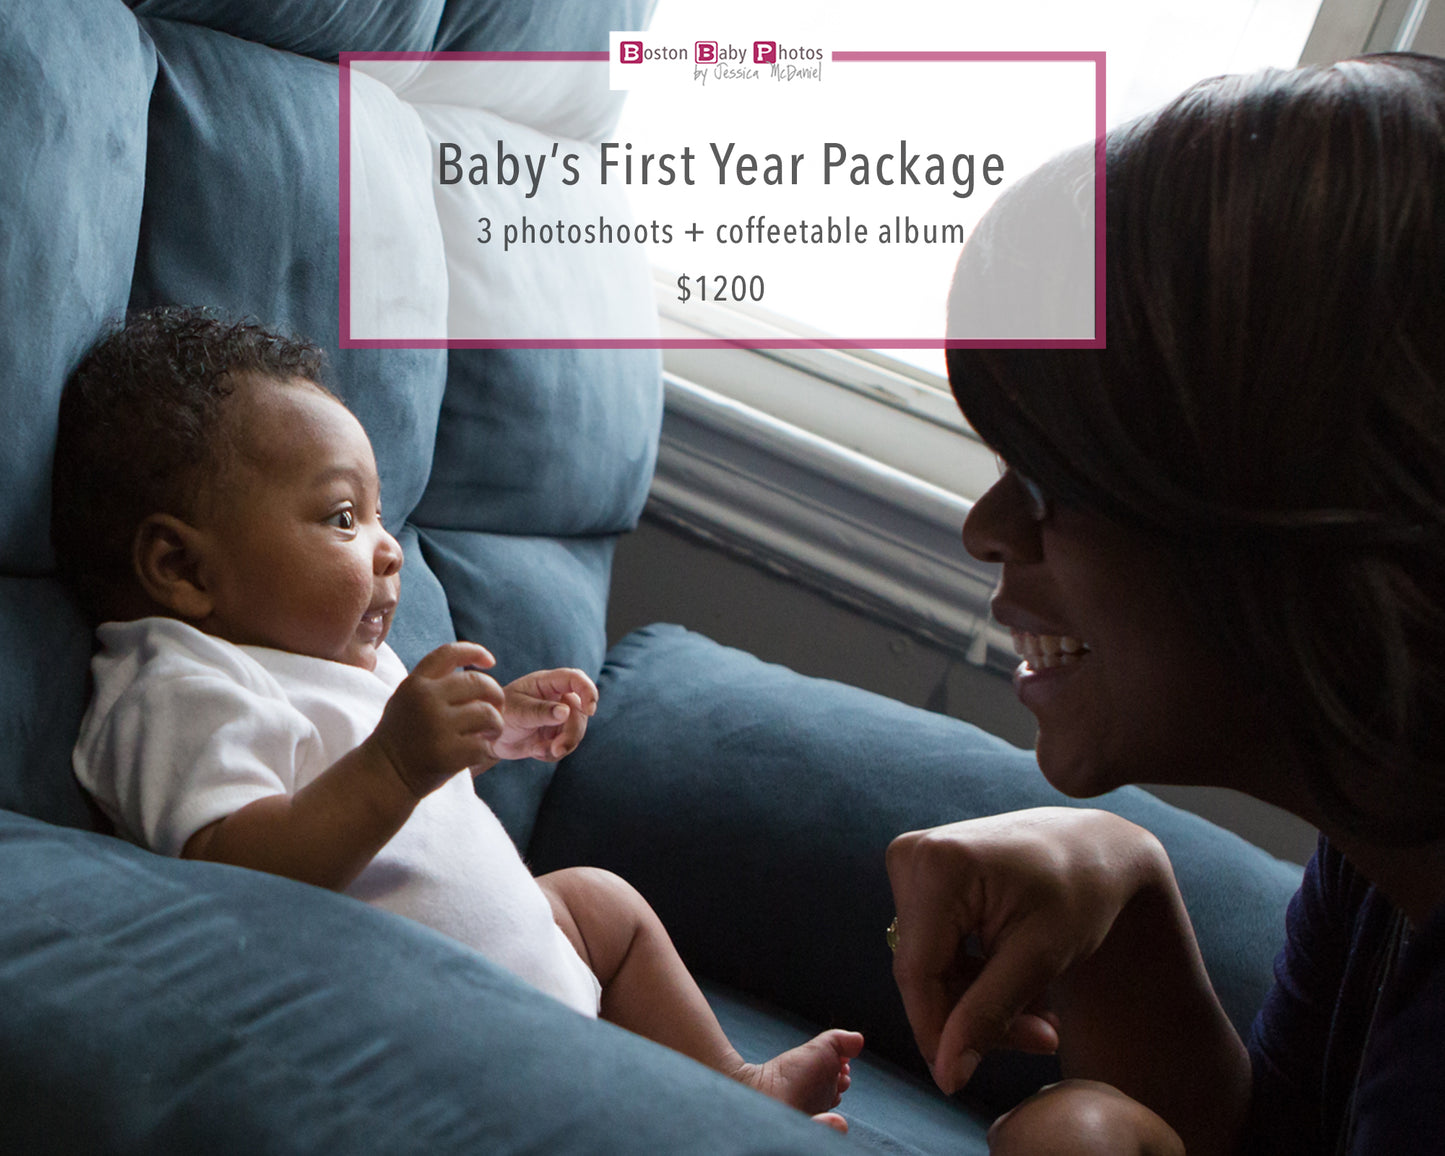 Baby's First Year Package Gift Card